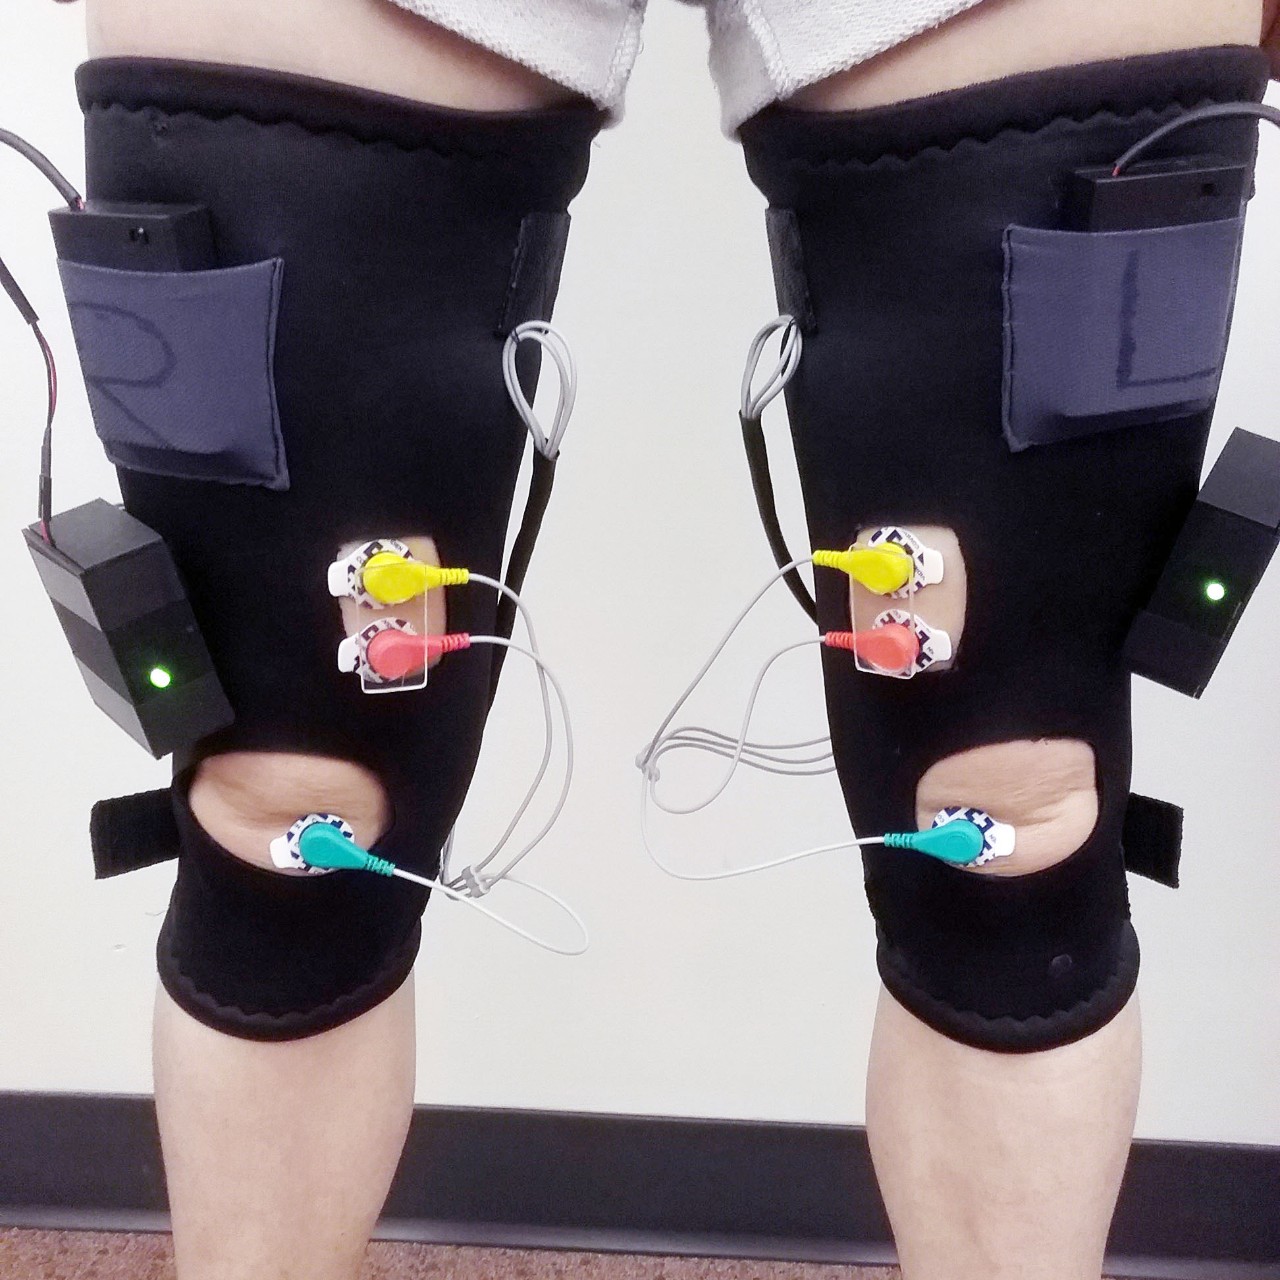 A different smart brace system, with two braces to compare leg symmetry.